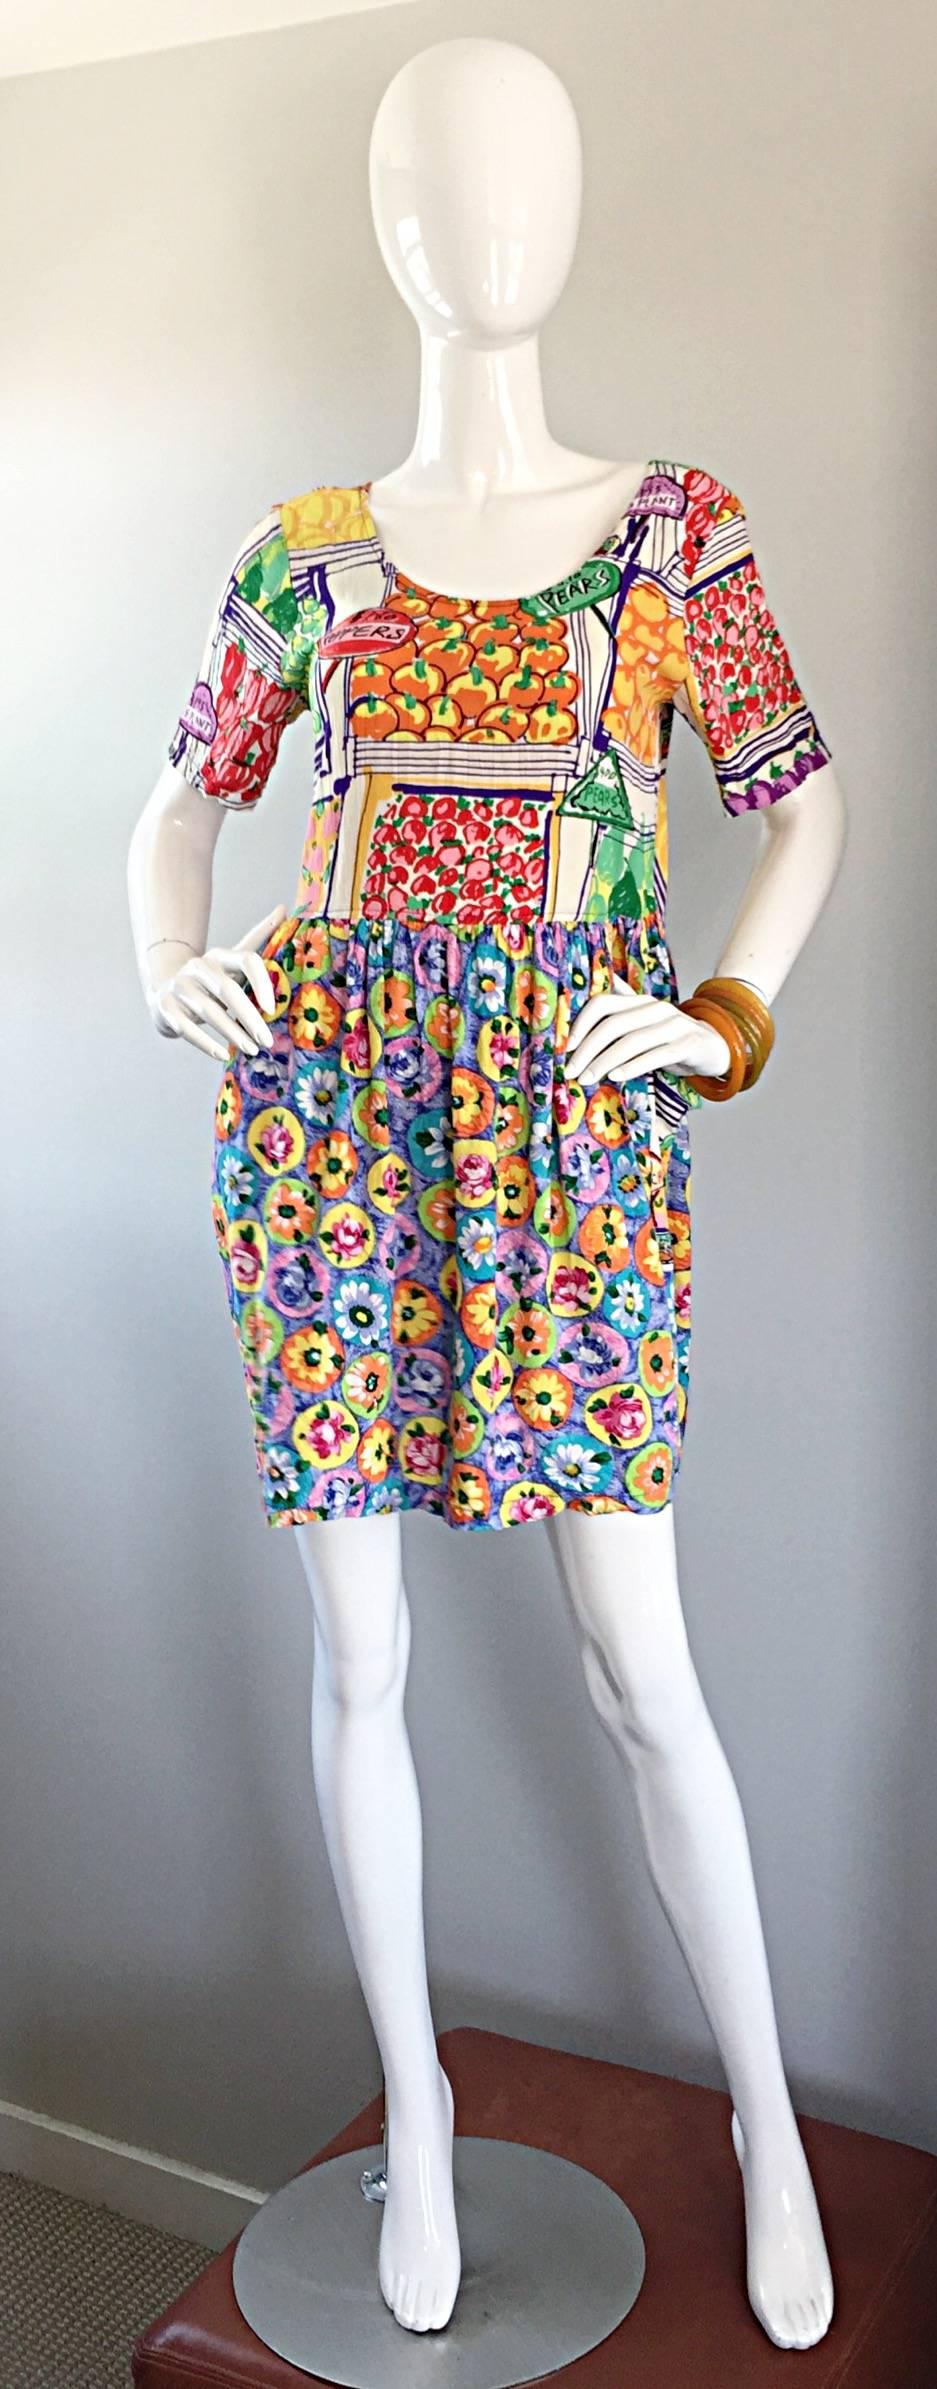 Simply amazing 1990s JAM'S WORLD dress! Very colorful, with awesome prints of fruit and vegetable stands throughout the bodice, with flowers printed throughout the skirt. Pockets at each side of the skirt. A perfect example of the whimsical designs